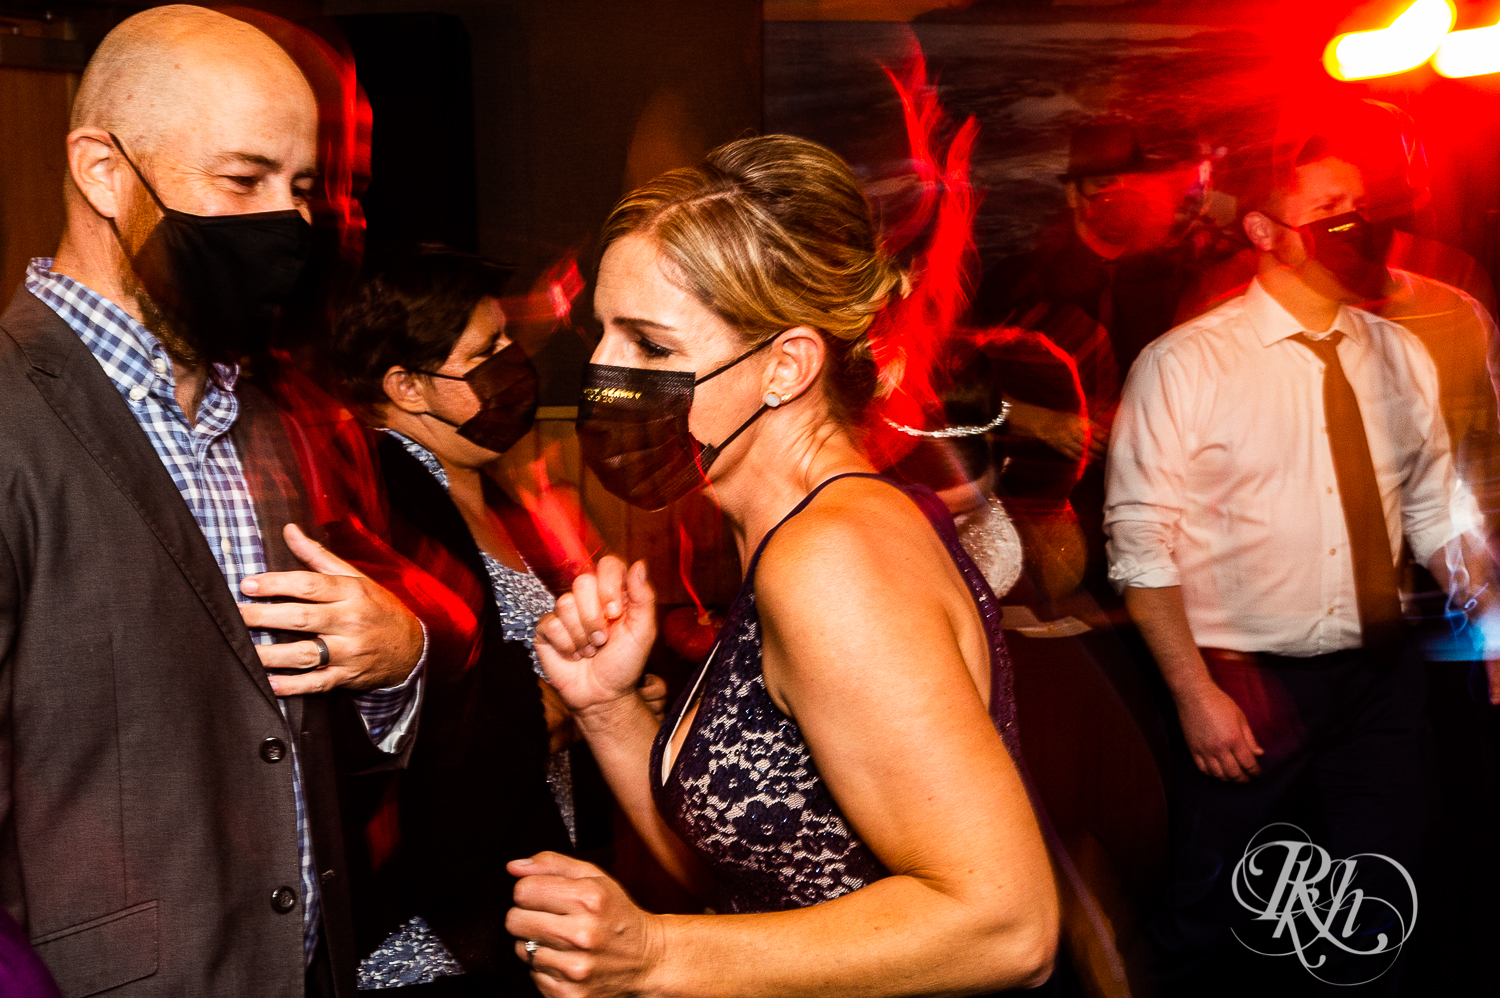 Guests dance with bride and groom at reception at Superior Shores Resort in Two Harbors, Minnesota.